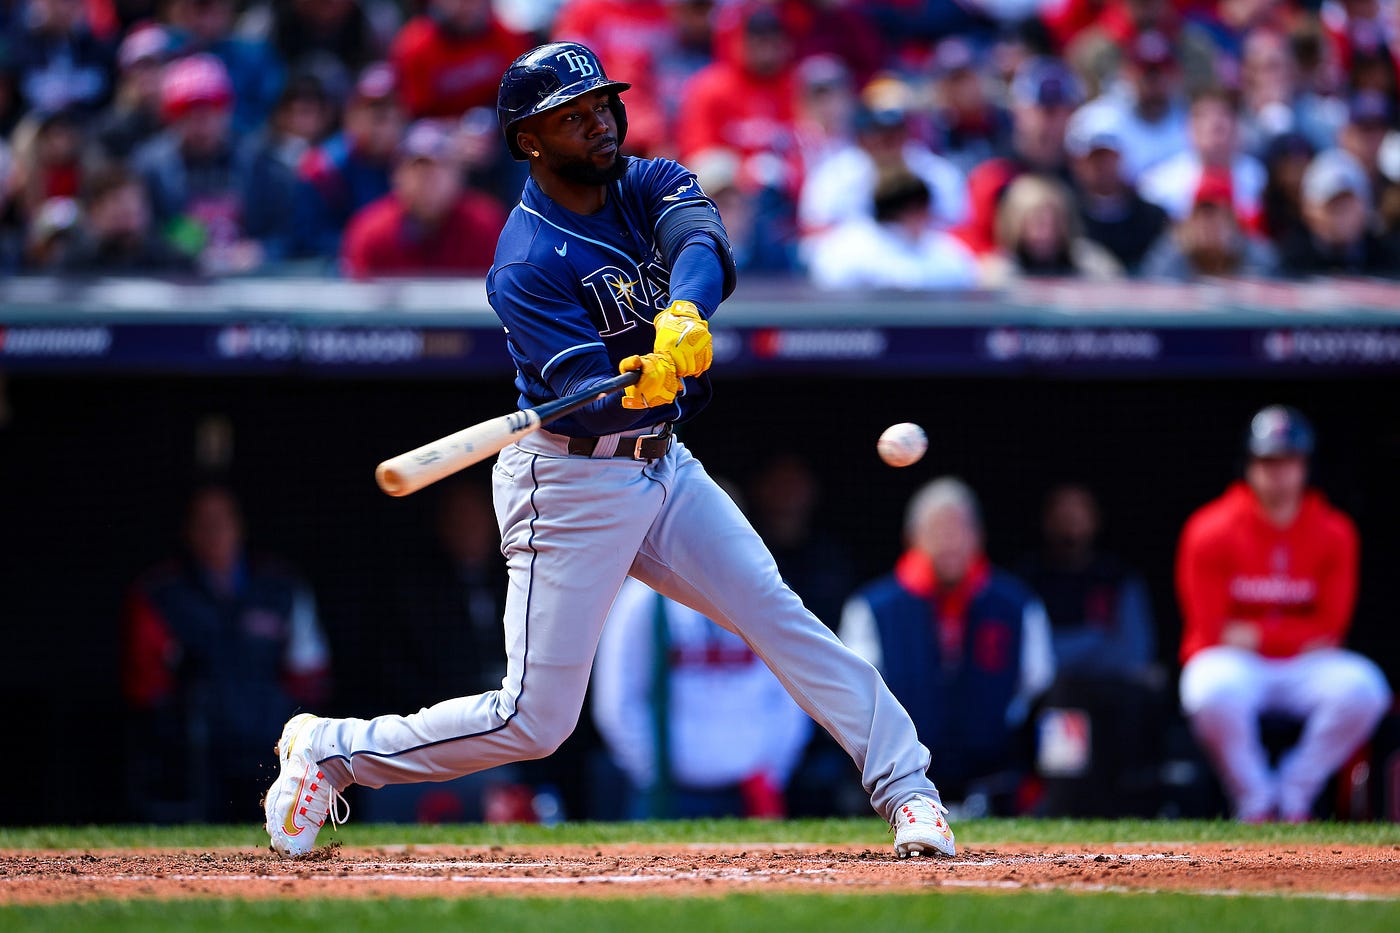 Which players are arbitration eligible? Free agents? A Rays roster